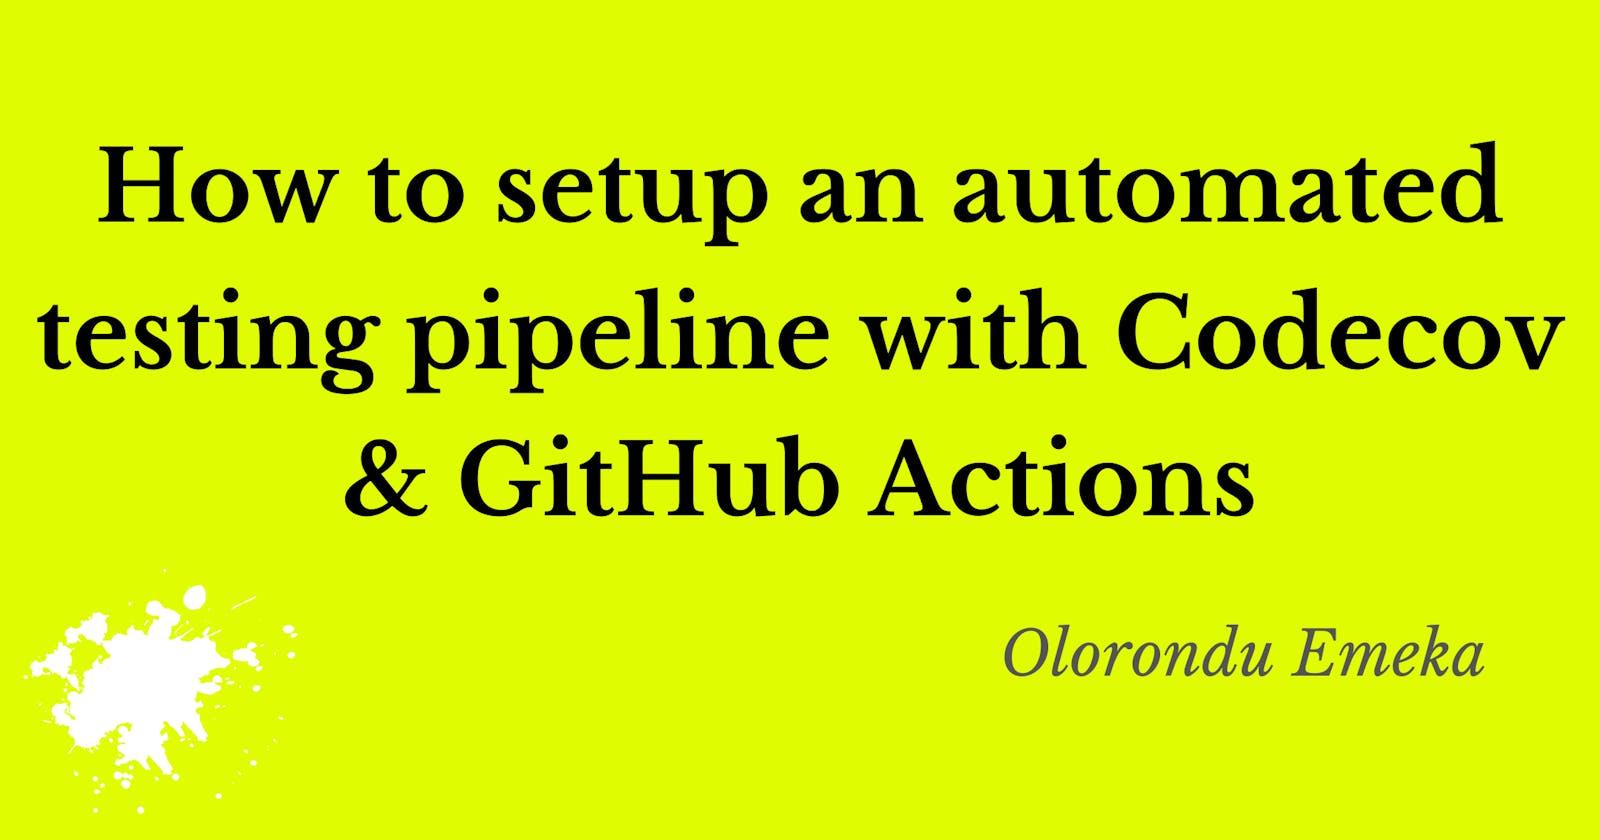 How to setup an automated testing pipeline with Codecov and GitHub Actions.